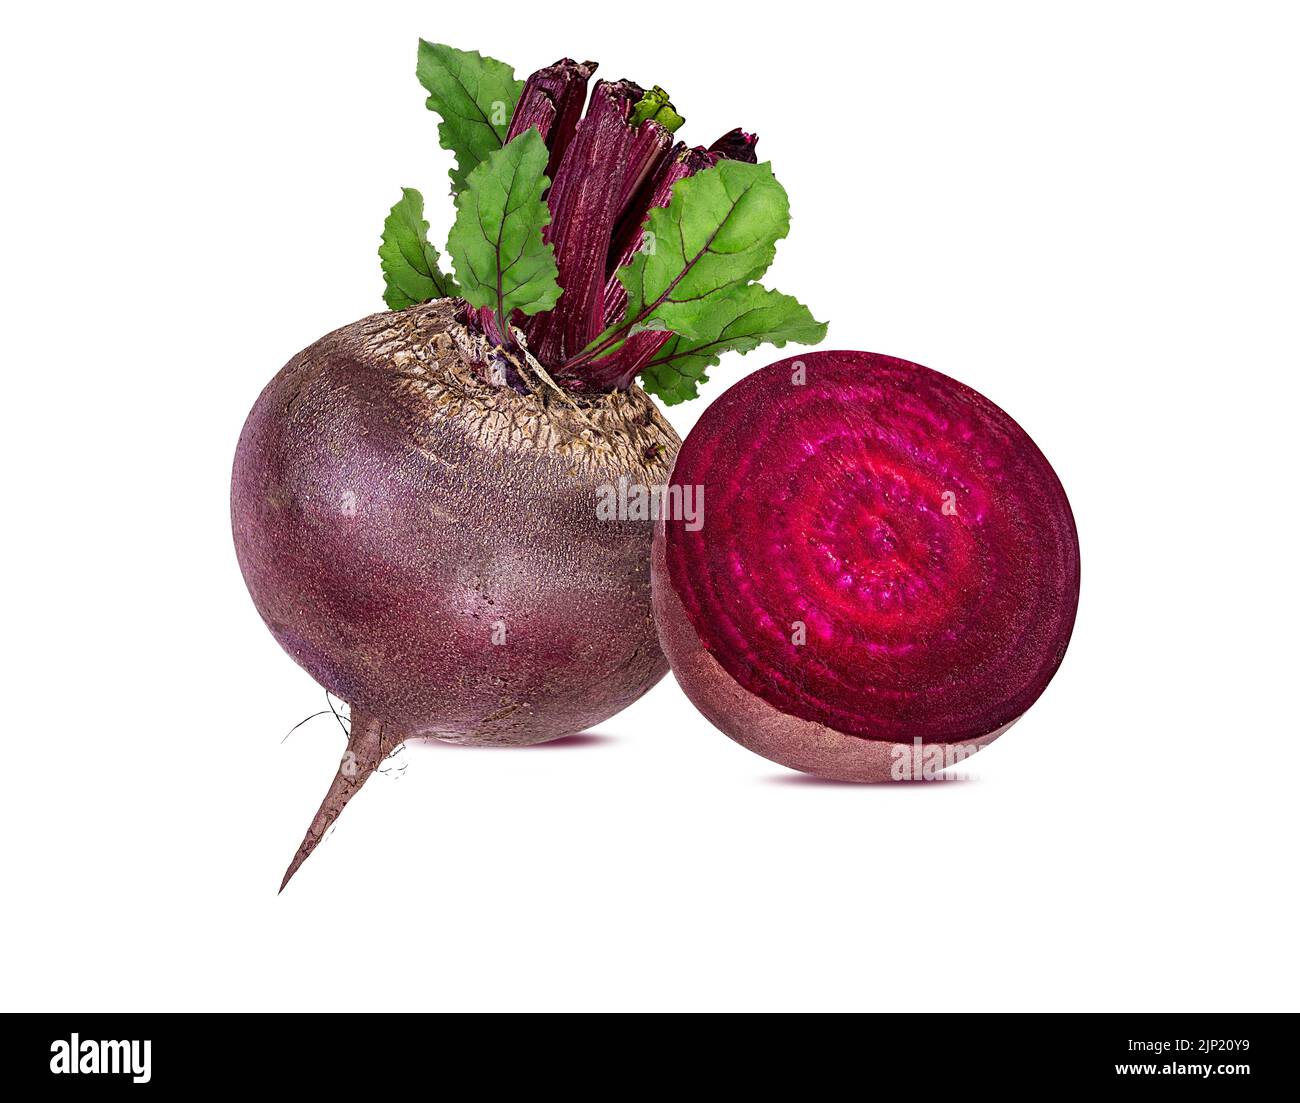 Beetroot with leaves isolated on white background Stock Photo